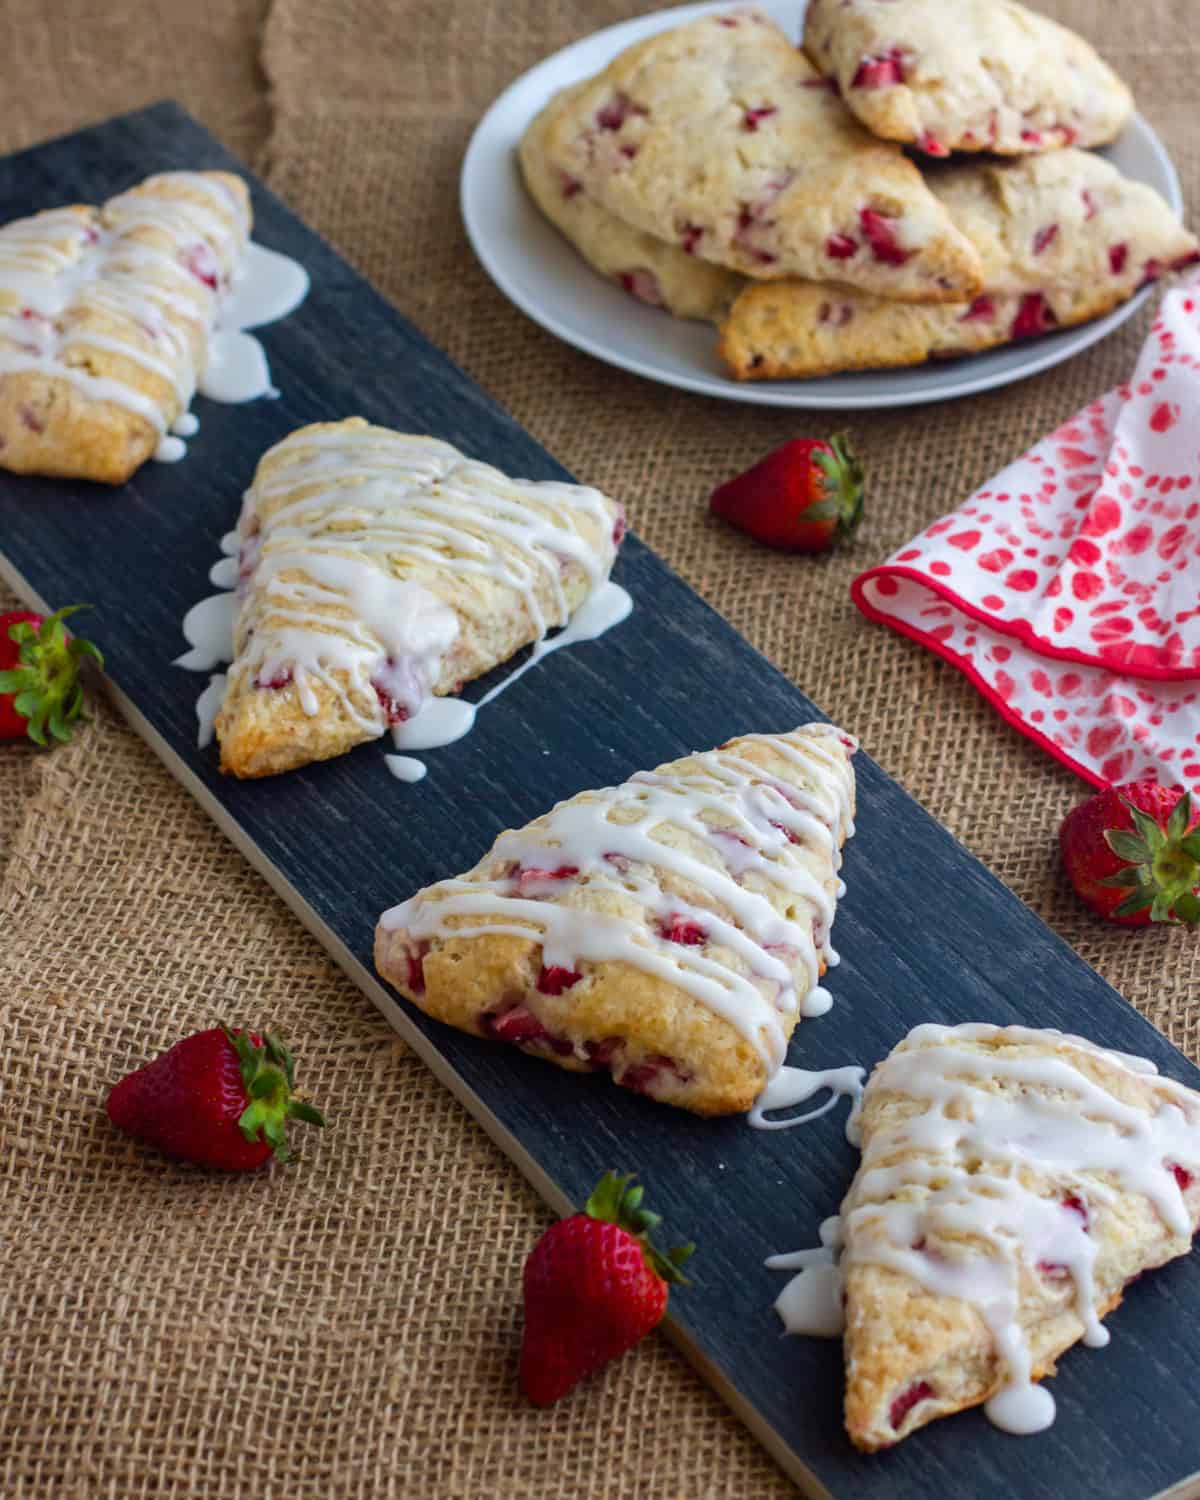 Scones on a tray with drizzled icing.